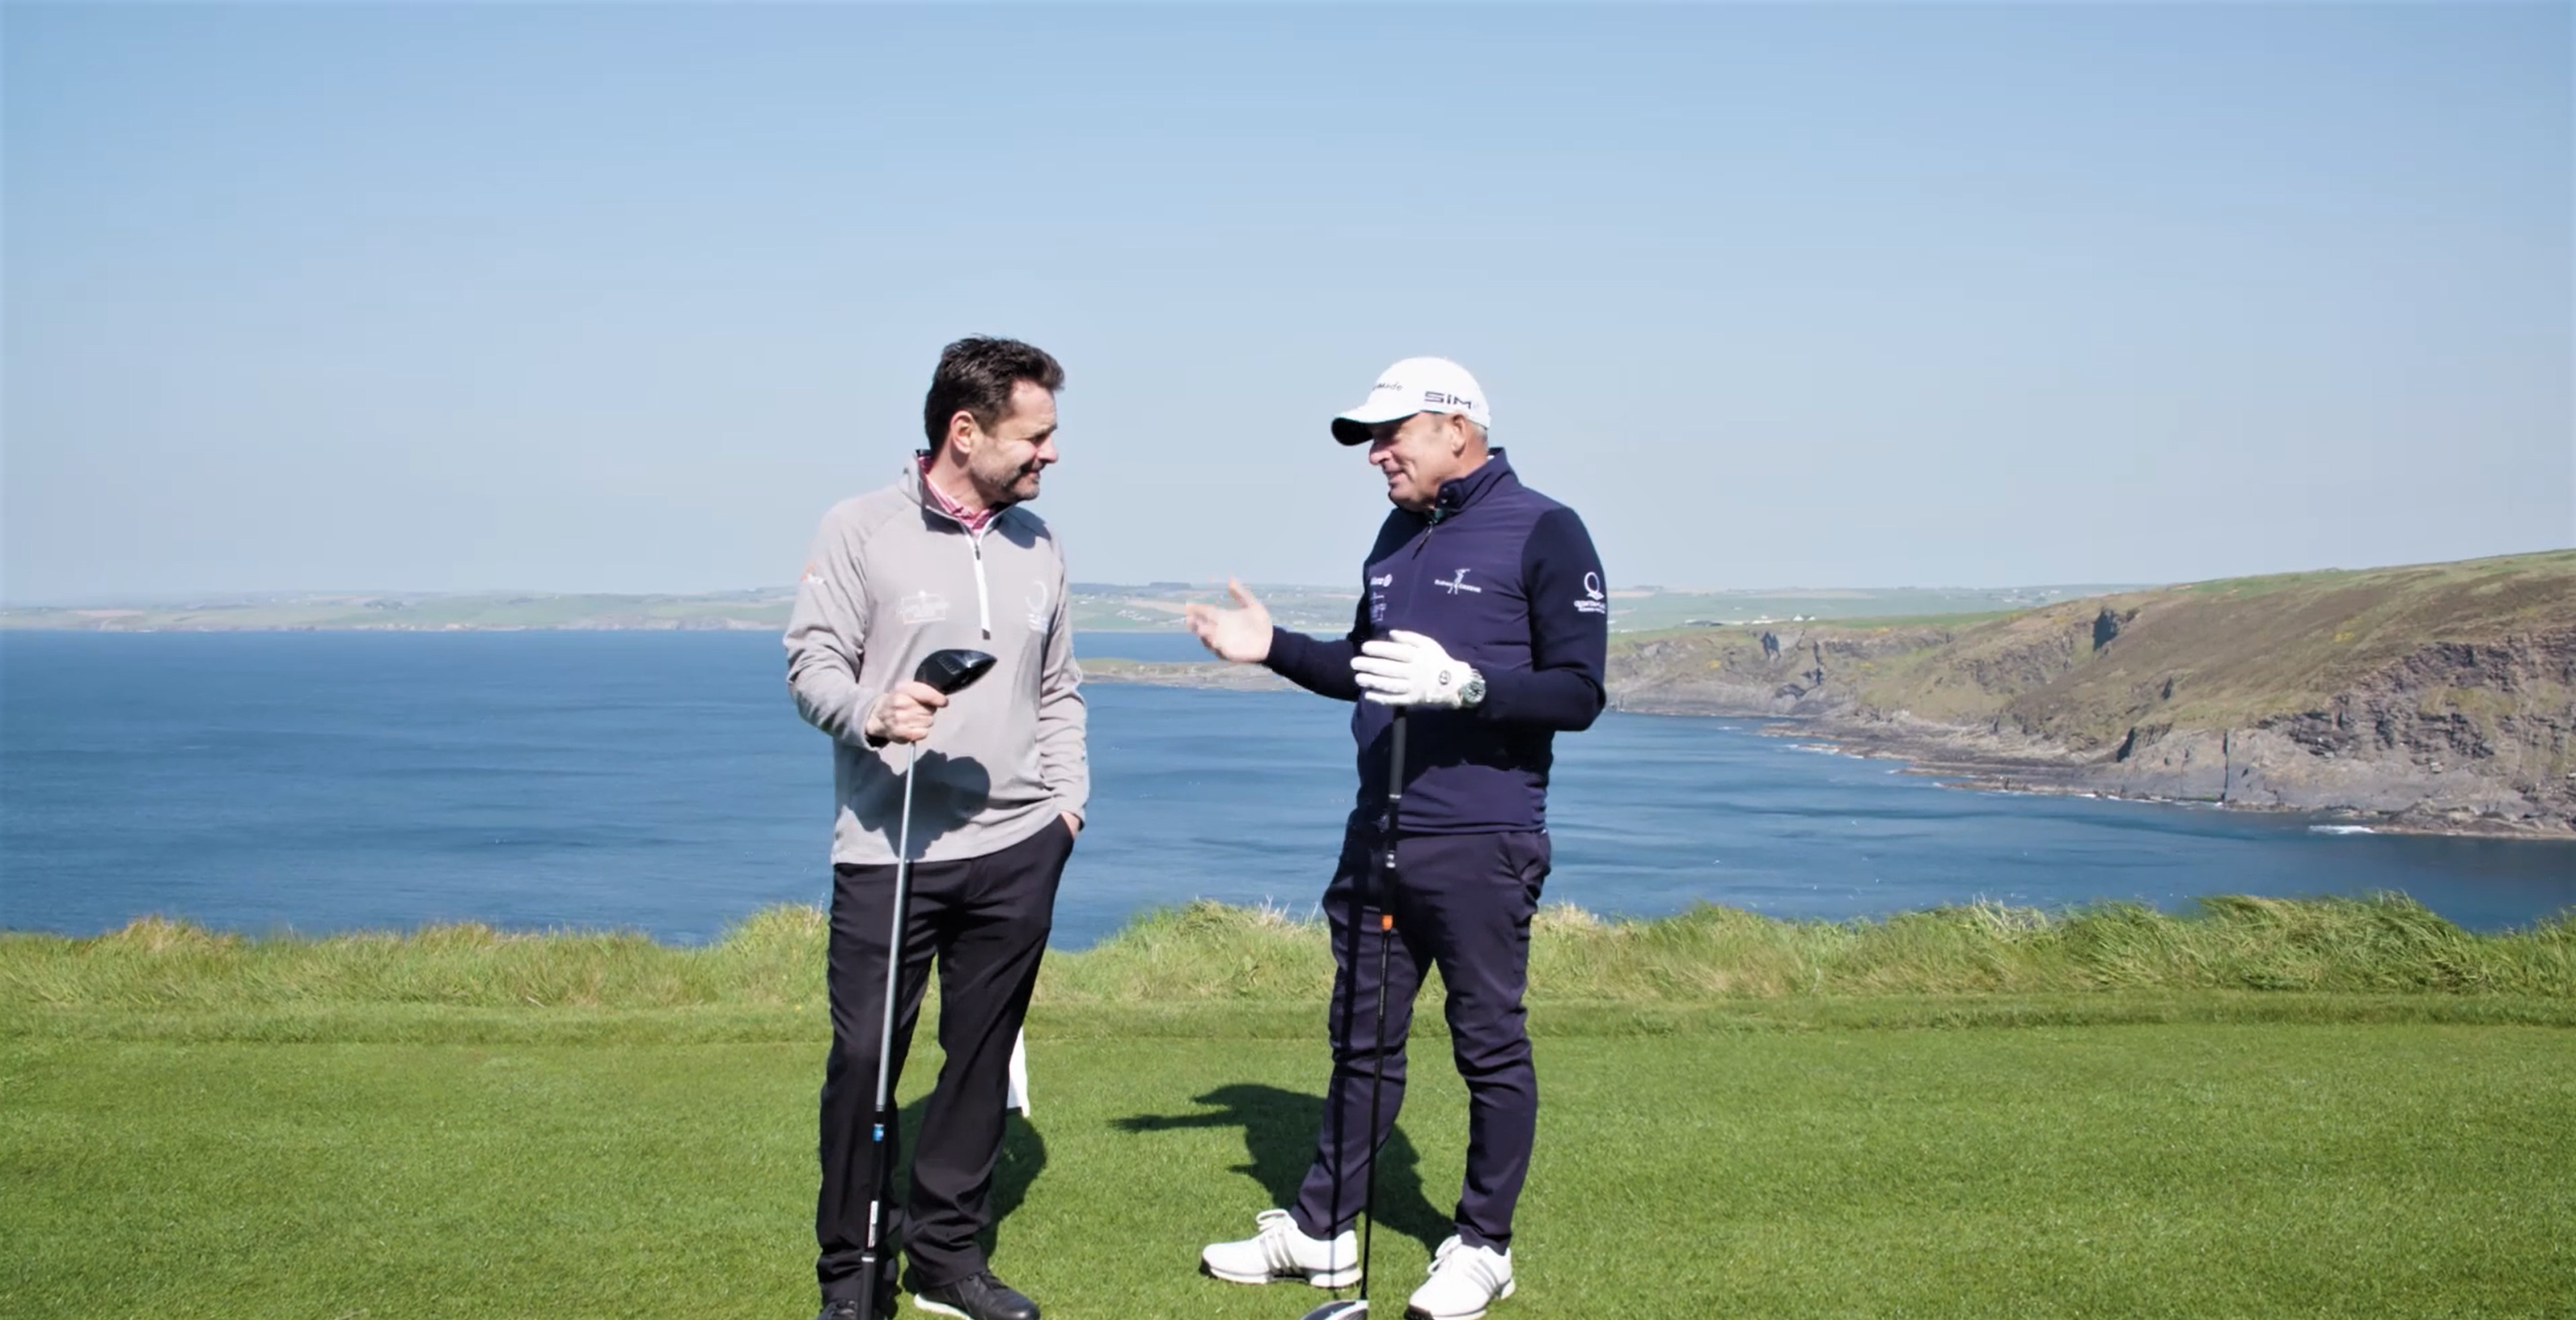 GOLFPASSEpisode One - Old Head - Paul and Chris 10 (1)